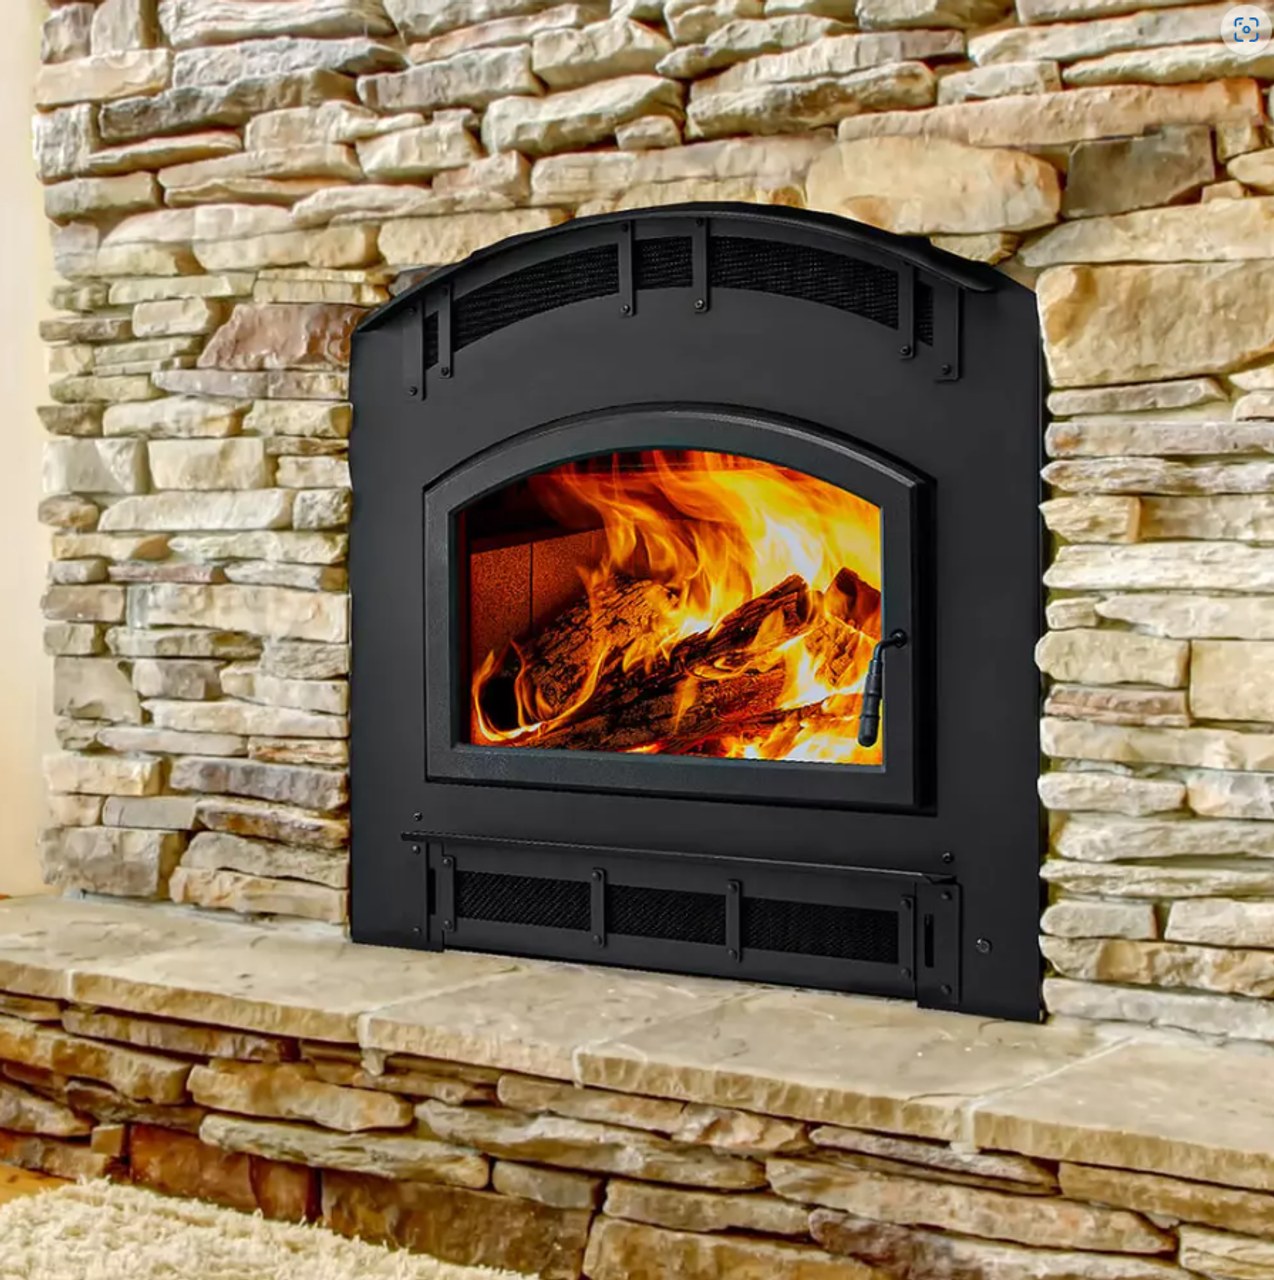 Majestic Pioneer III Arched Wood Burning Fireplace